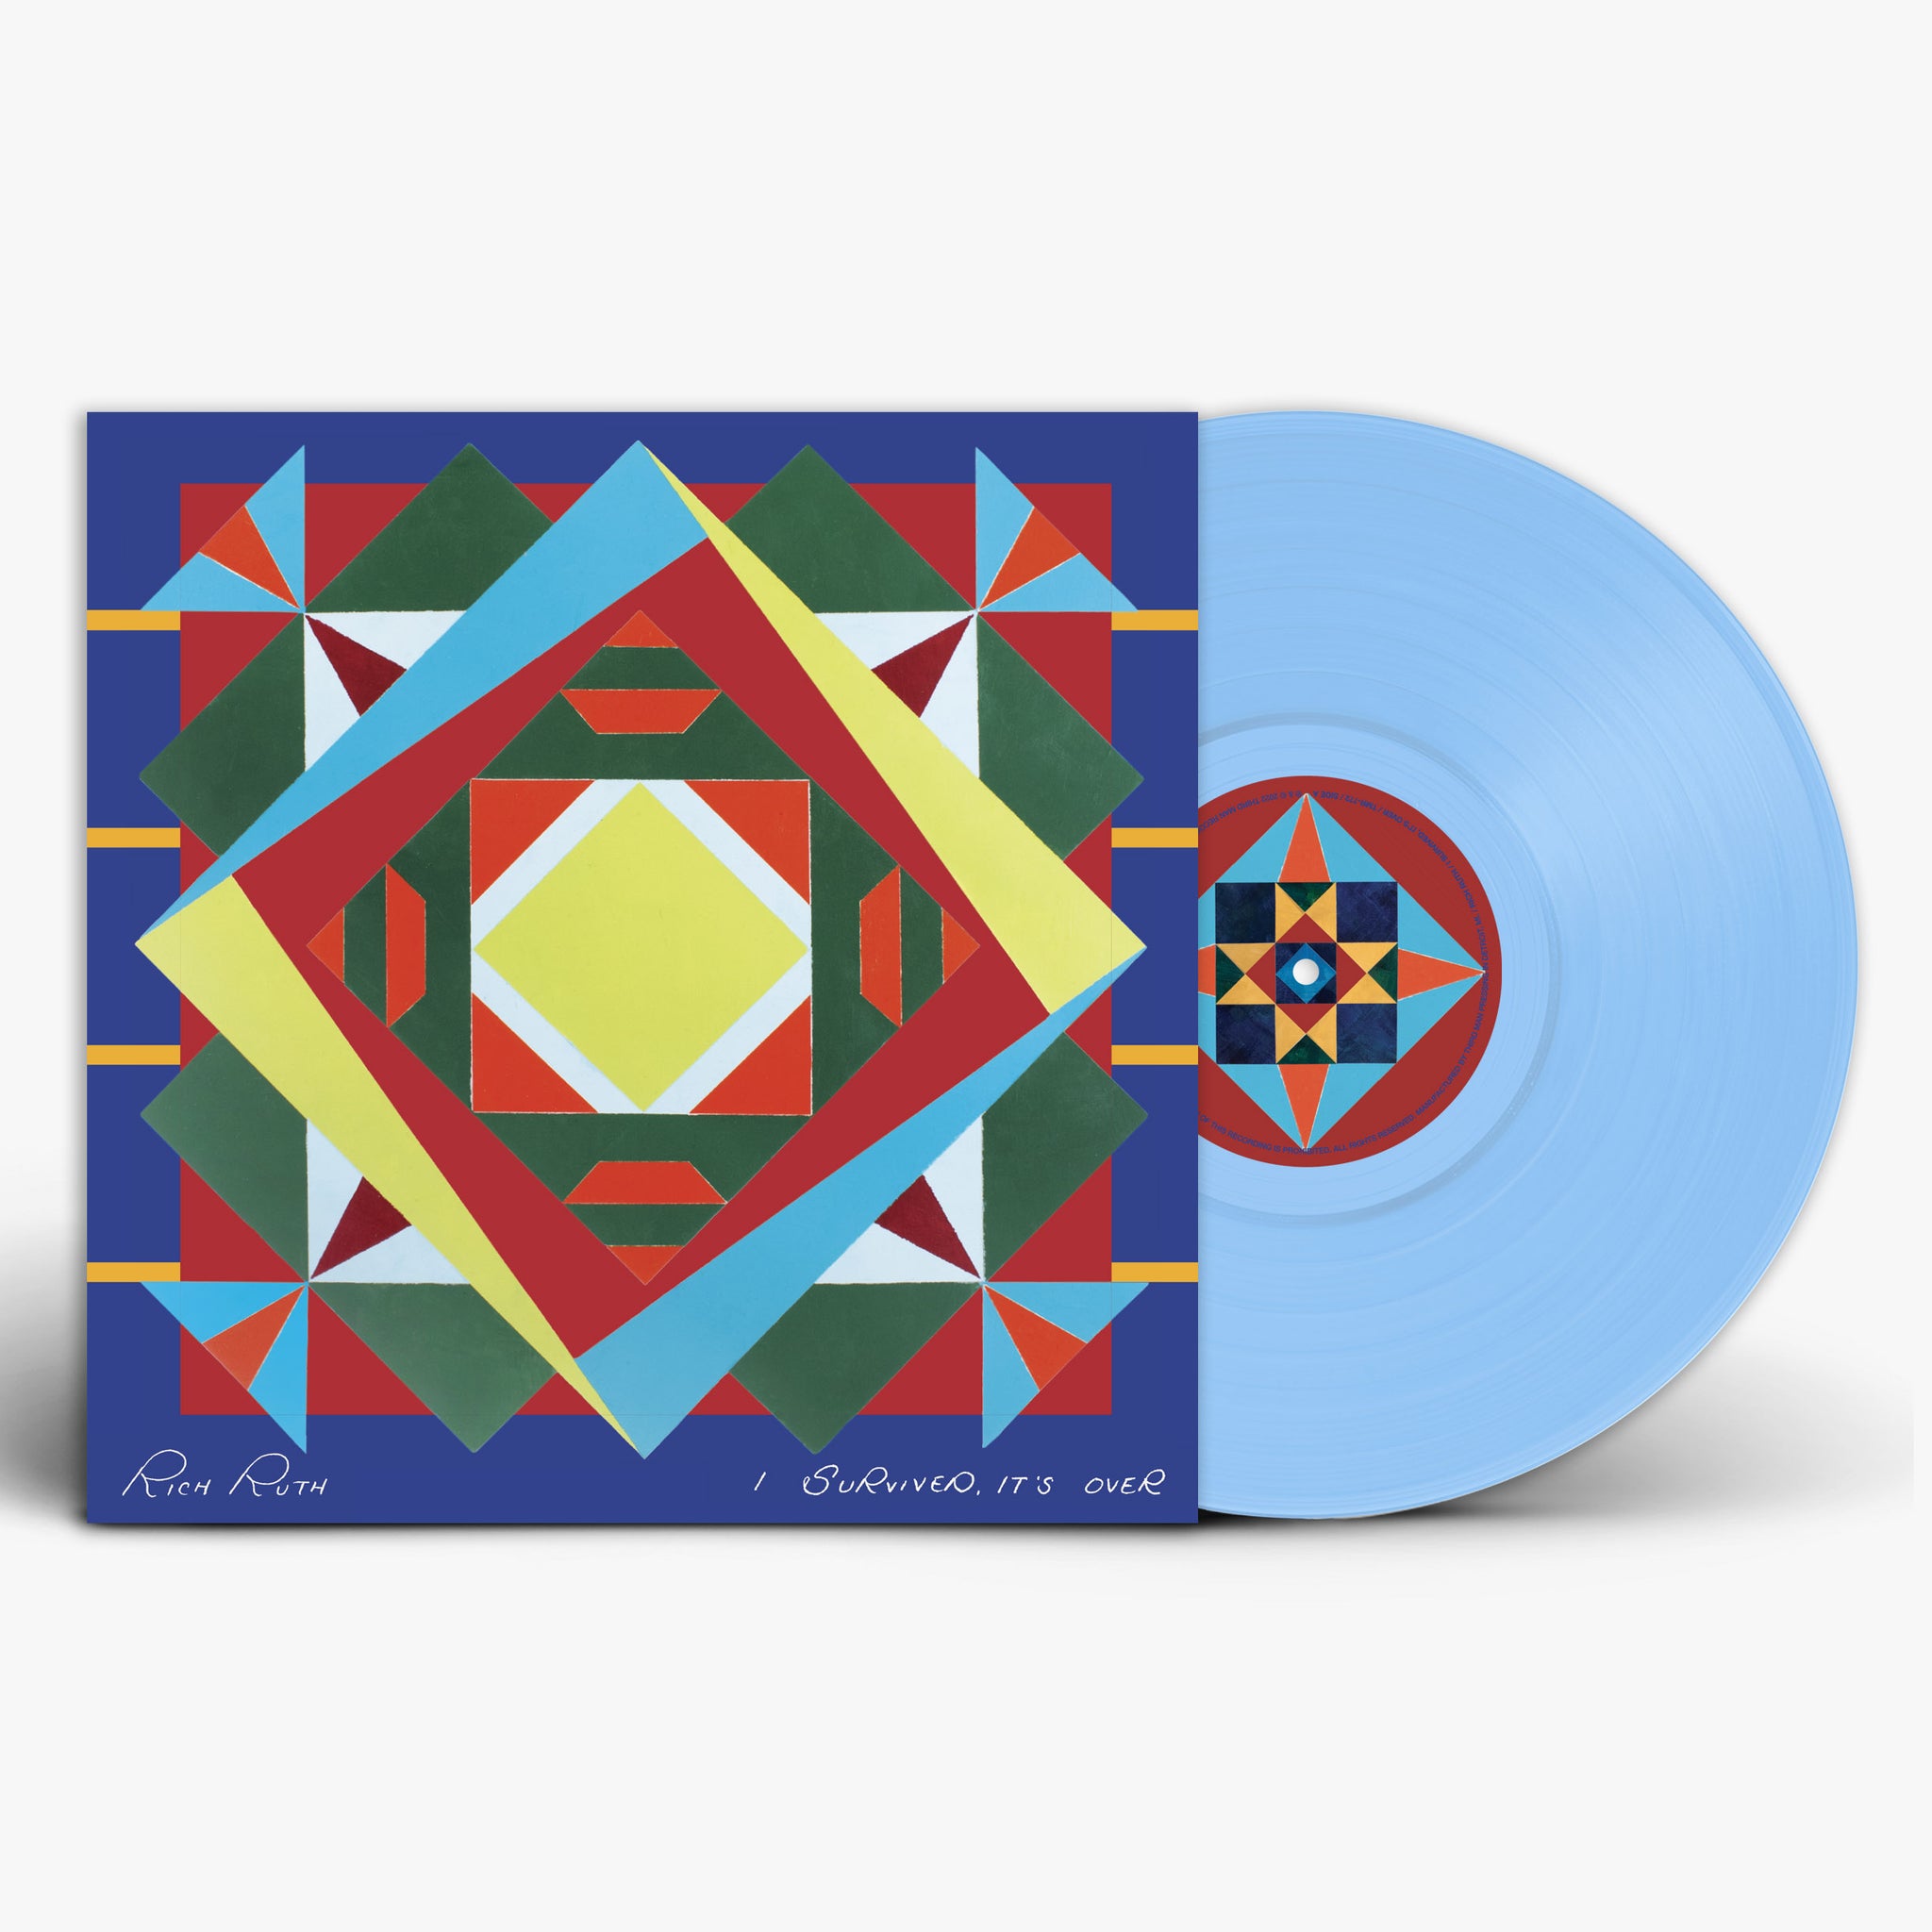 I Survived, It's Over (Limited Edition Indie Sky Blue Vinyl)